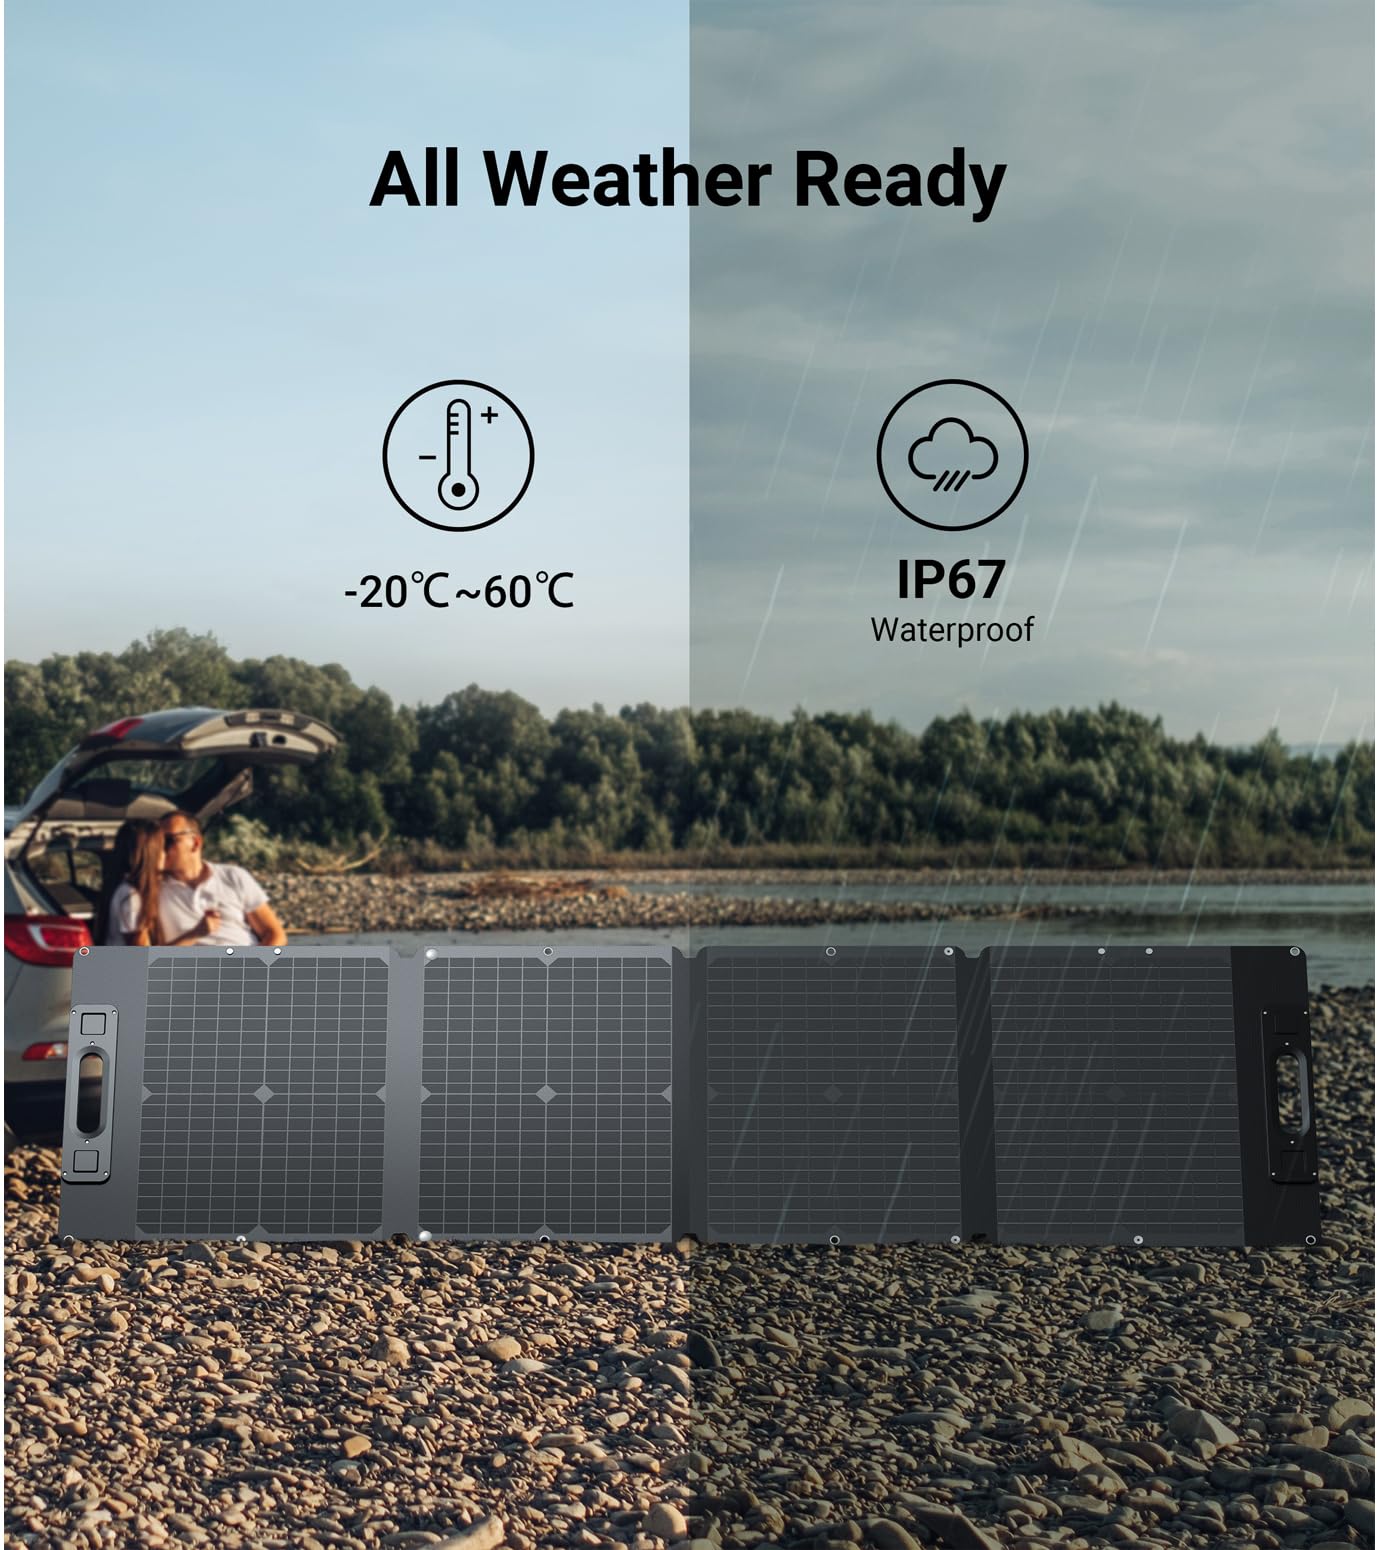 DailySolar 210W Ultra Lightweight Portable Solar Panel,100% Power Station Compatible, New Carbon Fiber Material, A-grade Premium High-Efficiency Monocrystalline PV Module, Ideal for Outdoor Camping,RV